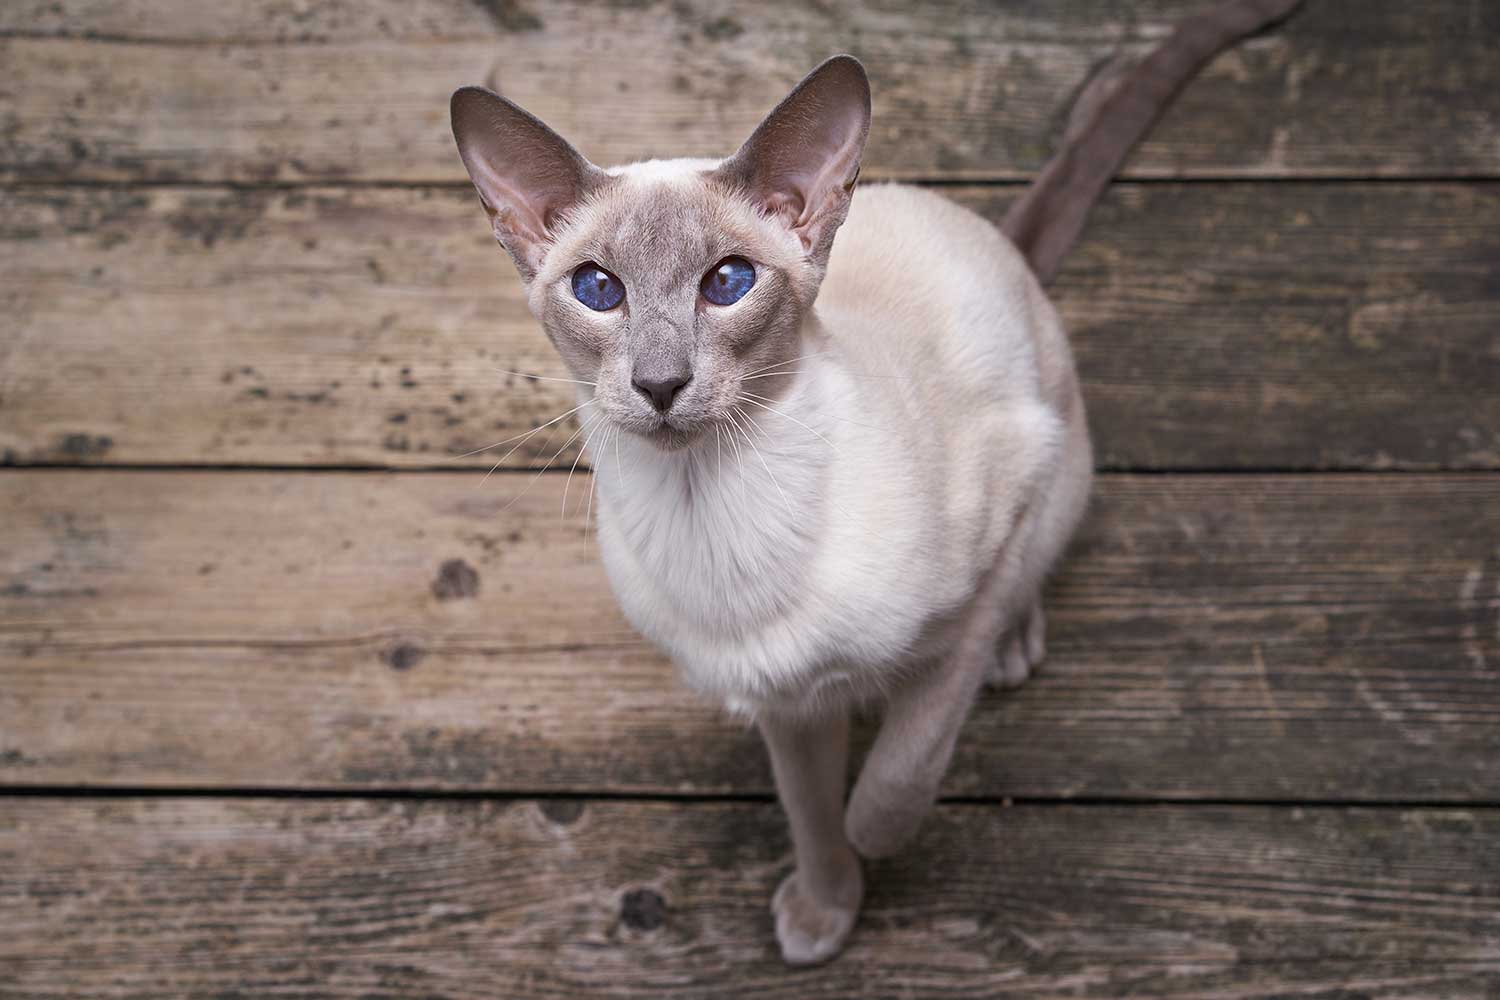 Modern Siamese cats are bred for a specific extreme look